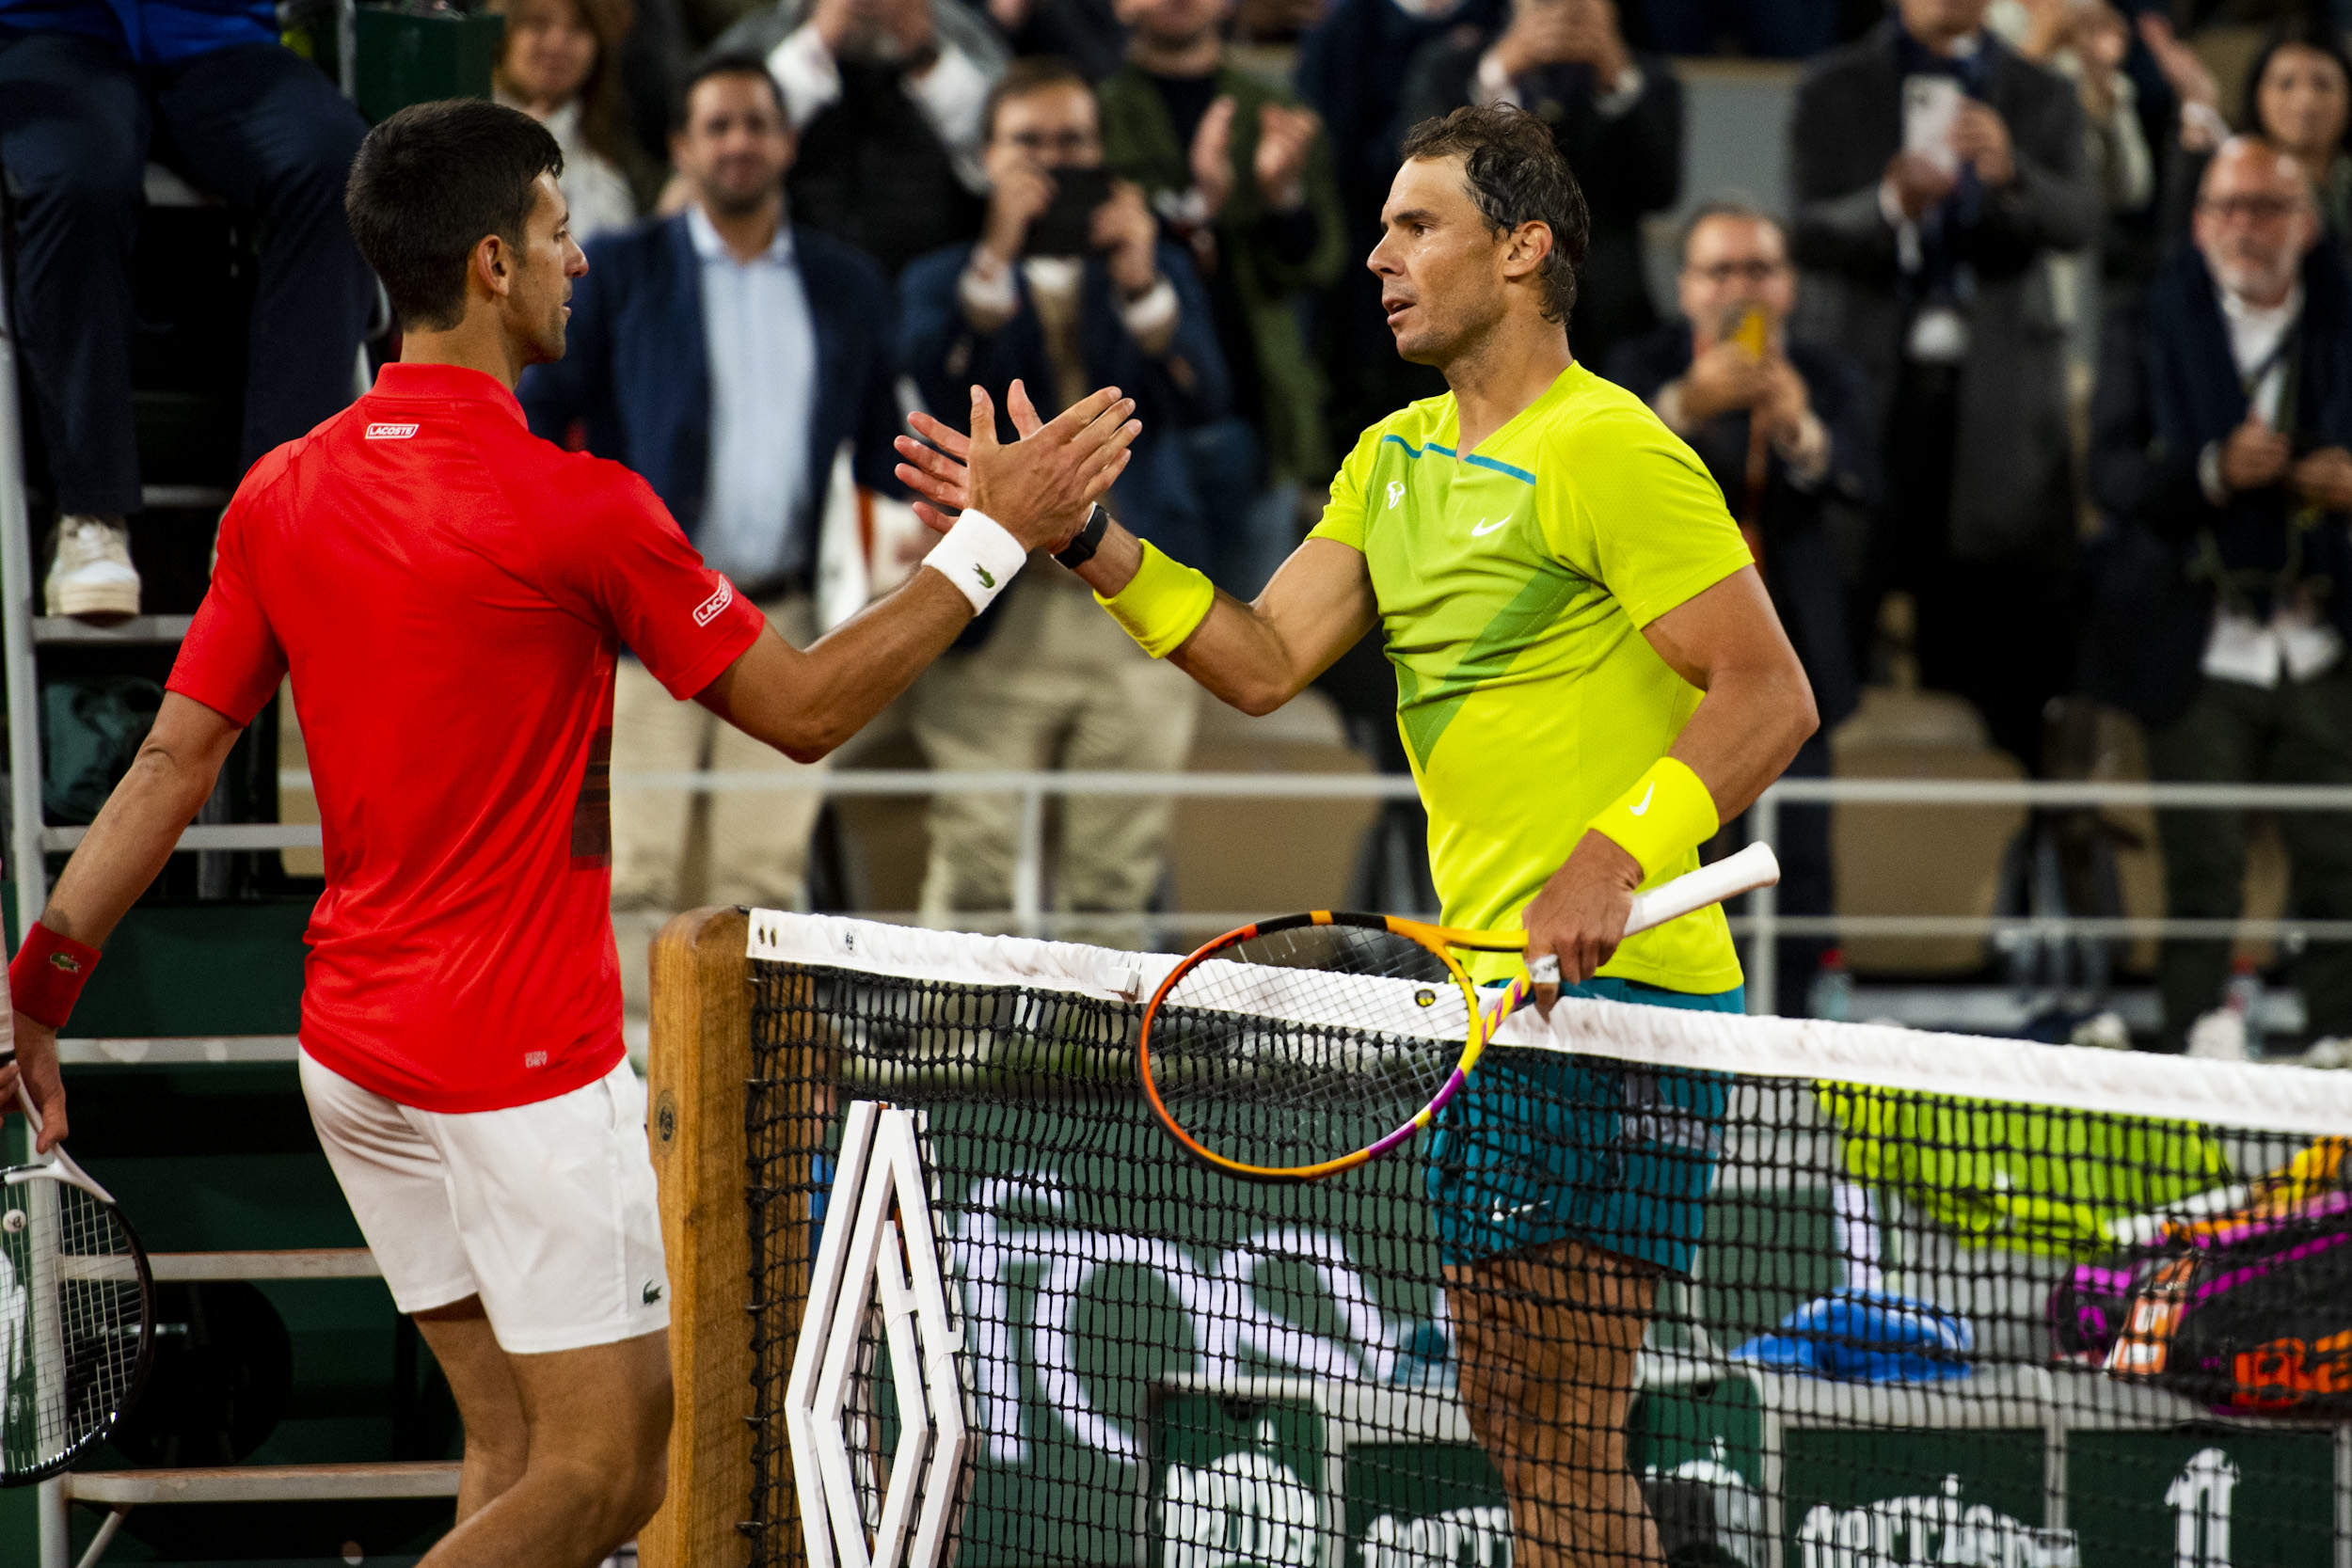 Nadal-Djokovic match a classic for the end of an era